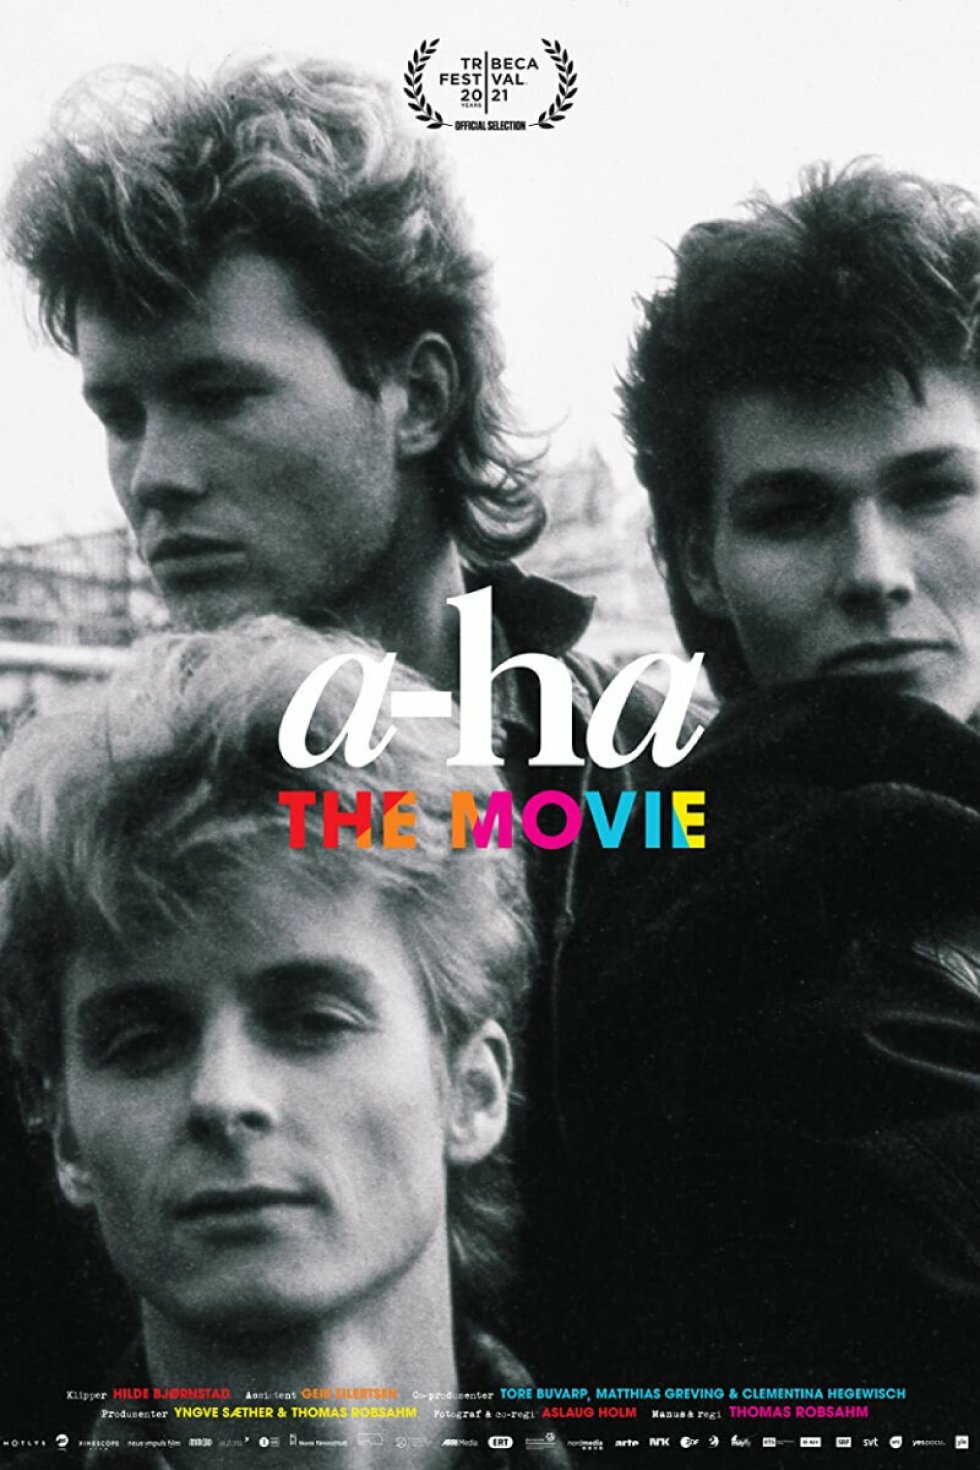 Anmeldelse: a-ha: The Movie